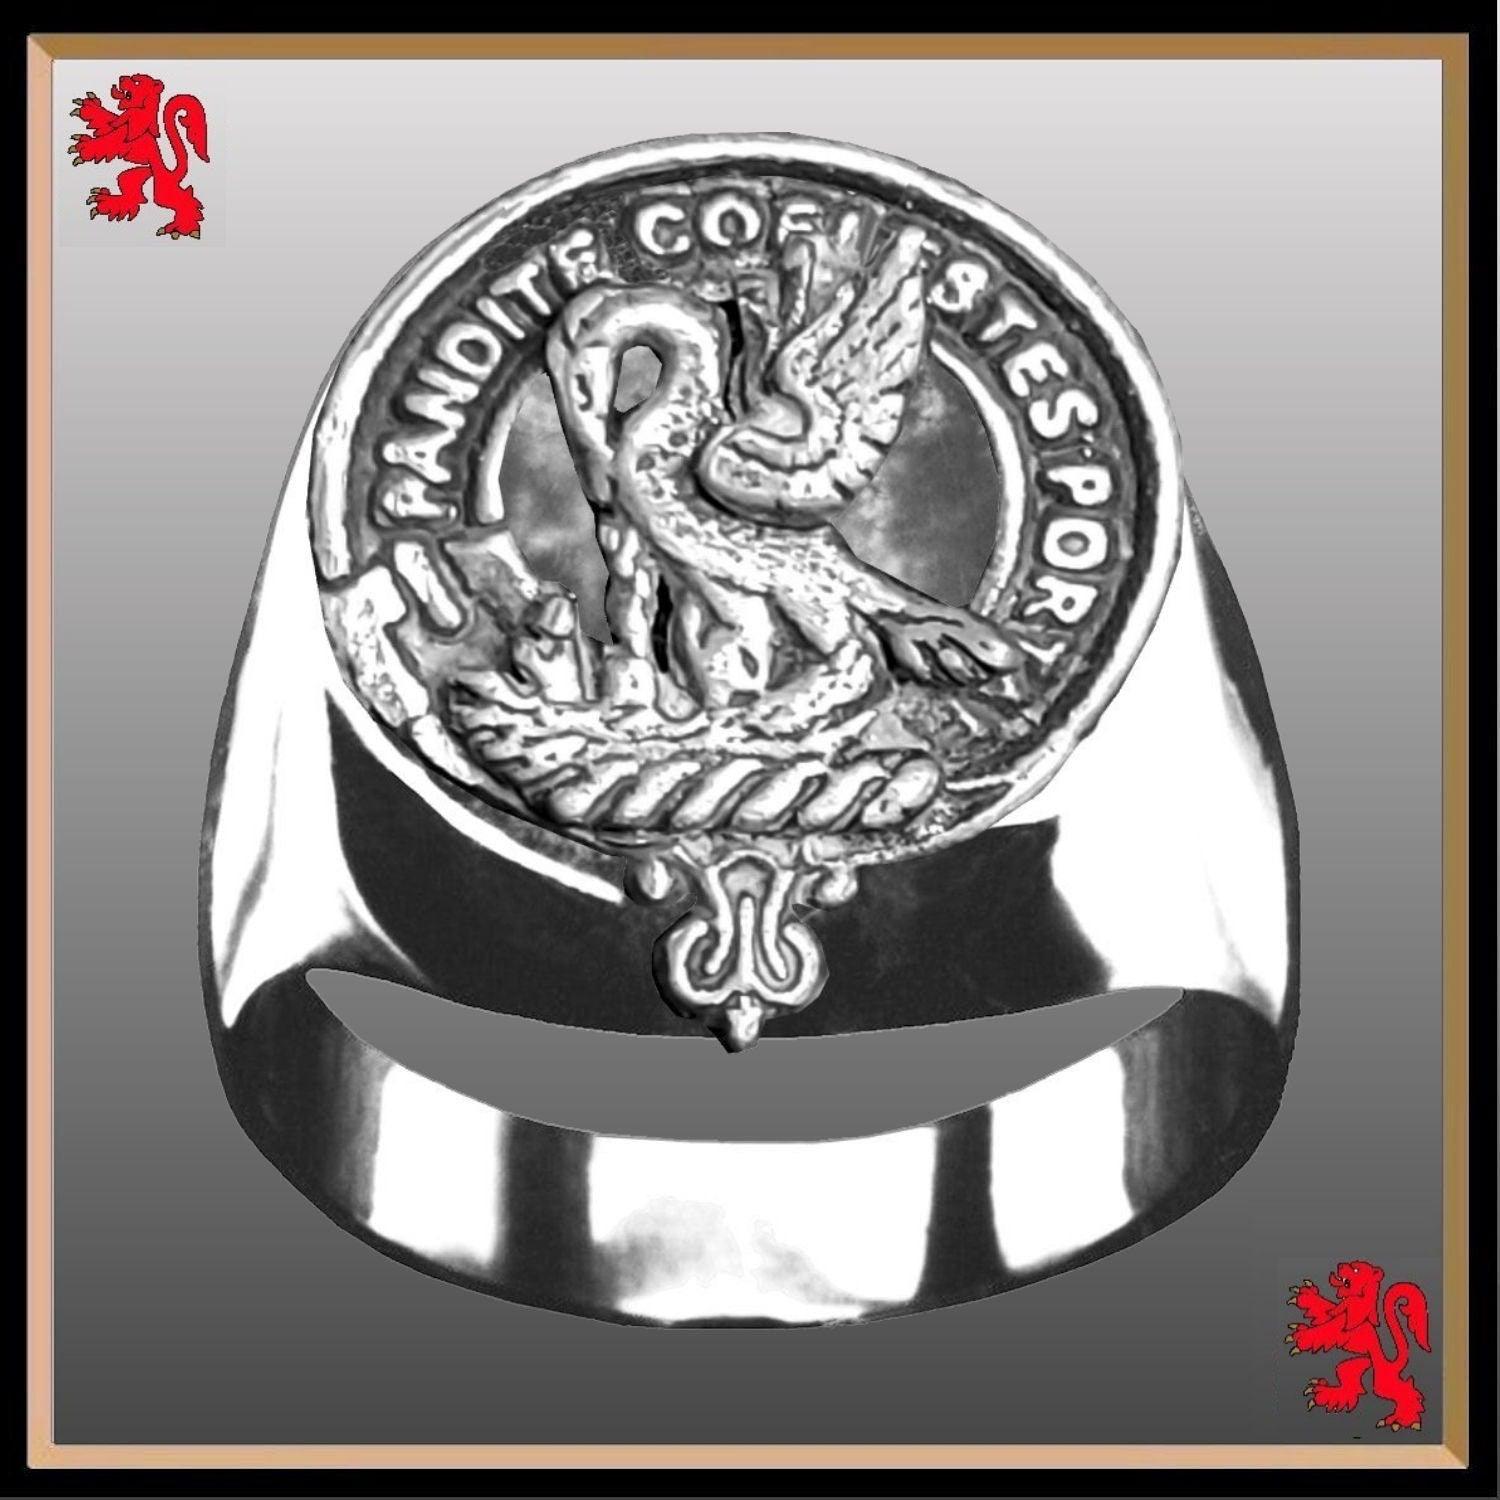 Gibson Scottish Clan Crest Ring GC100  ~  Sterling Silver and Karat Gold